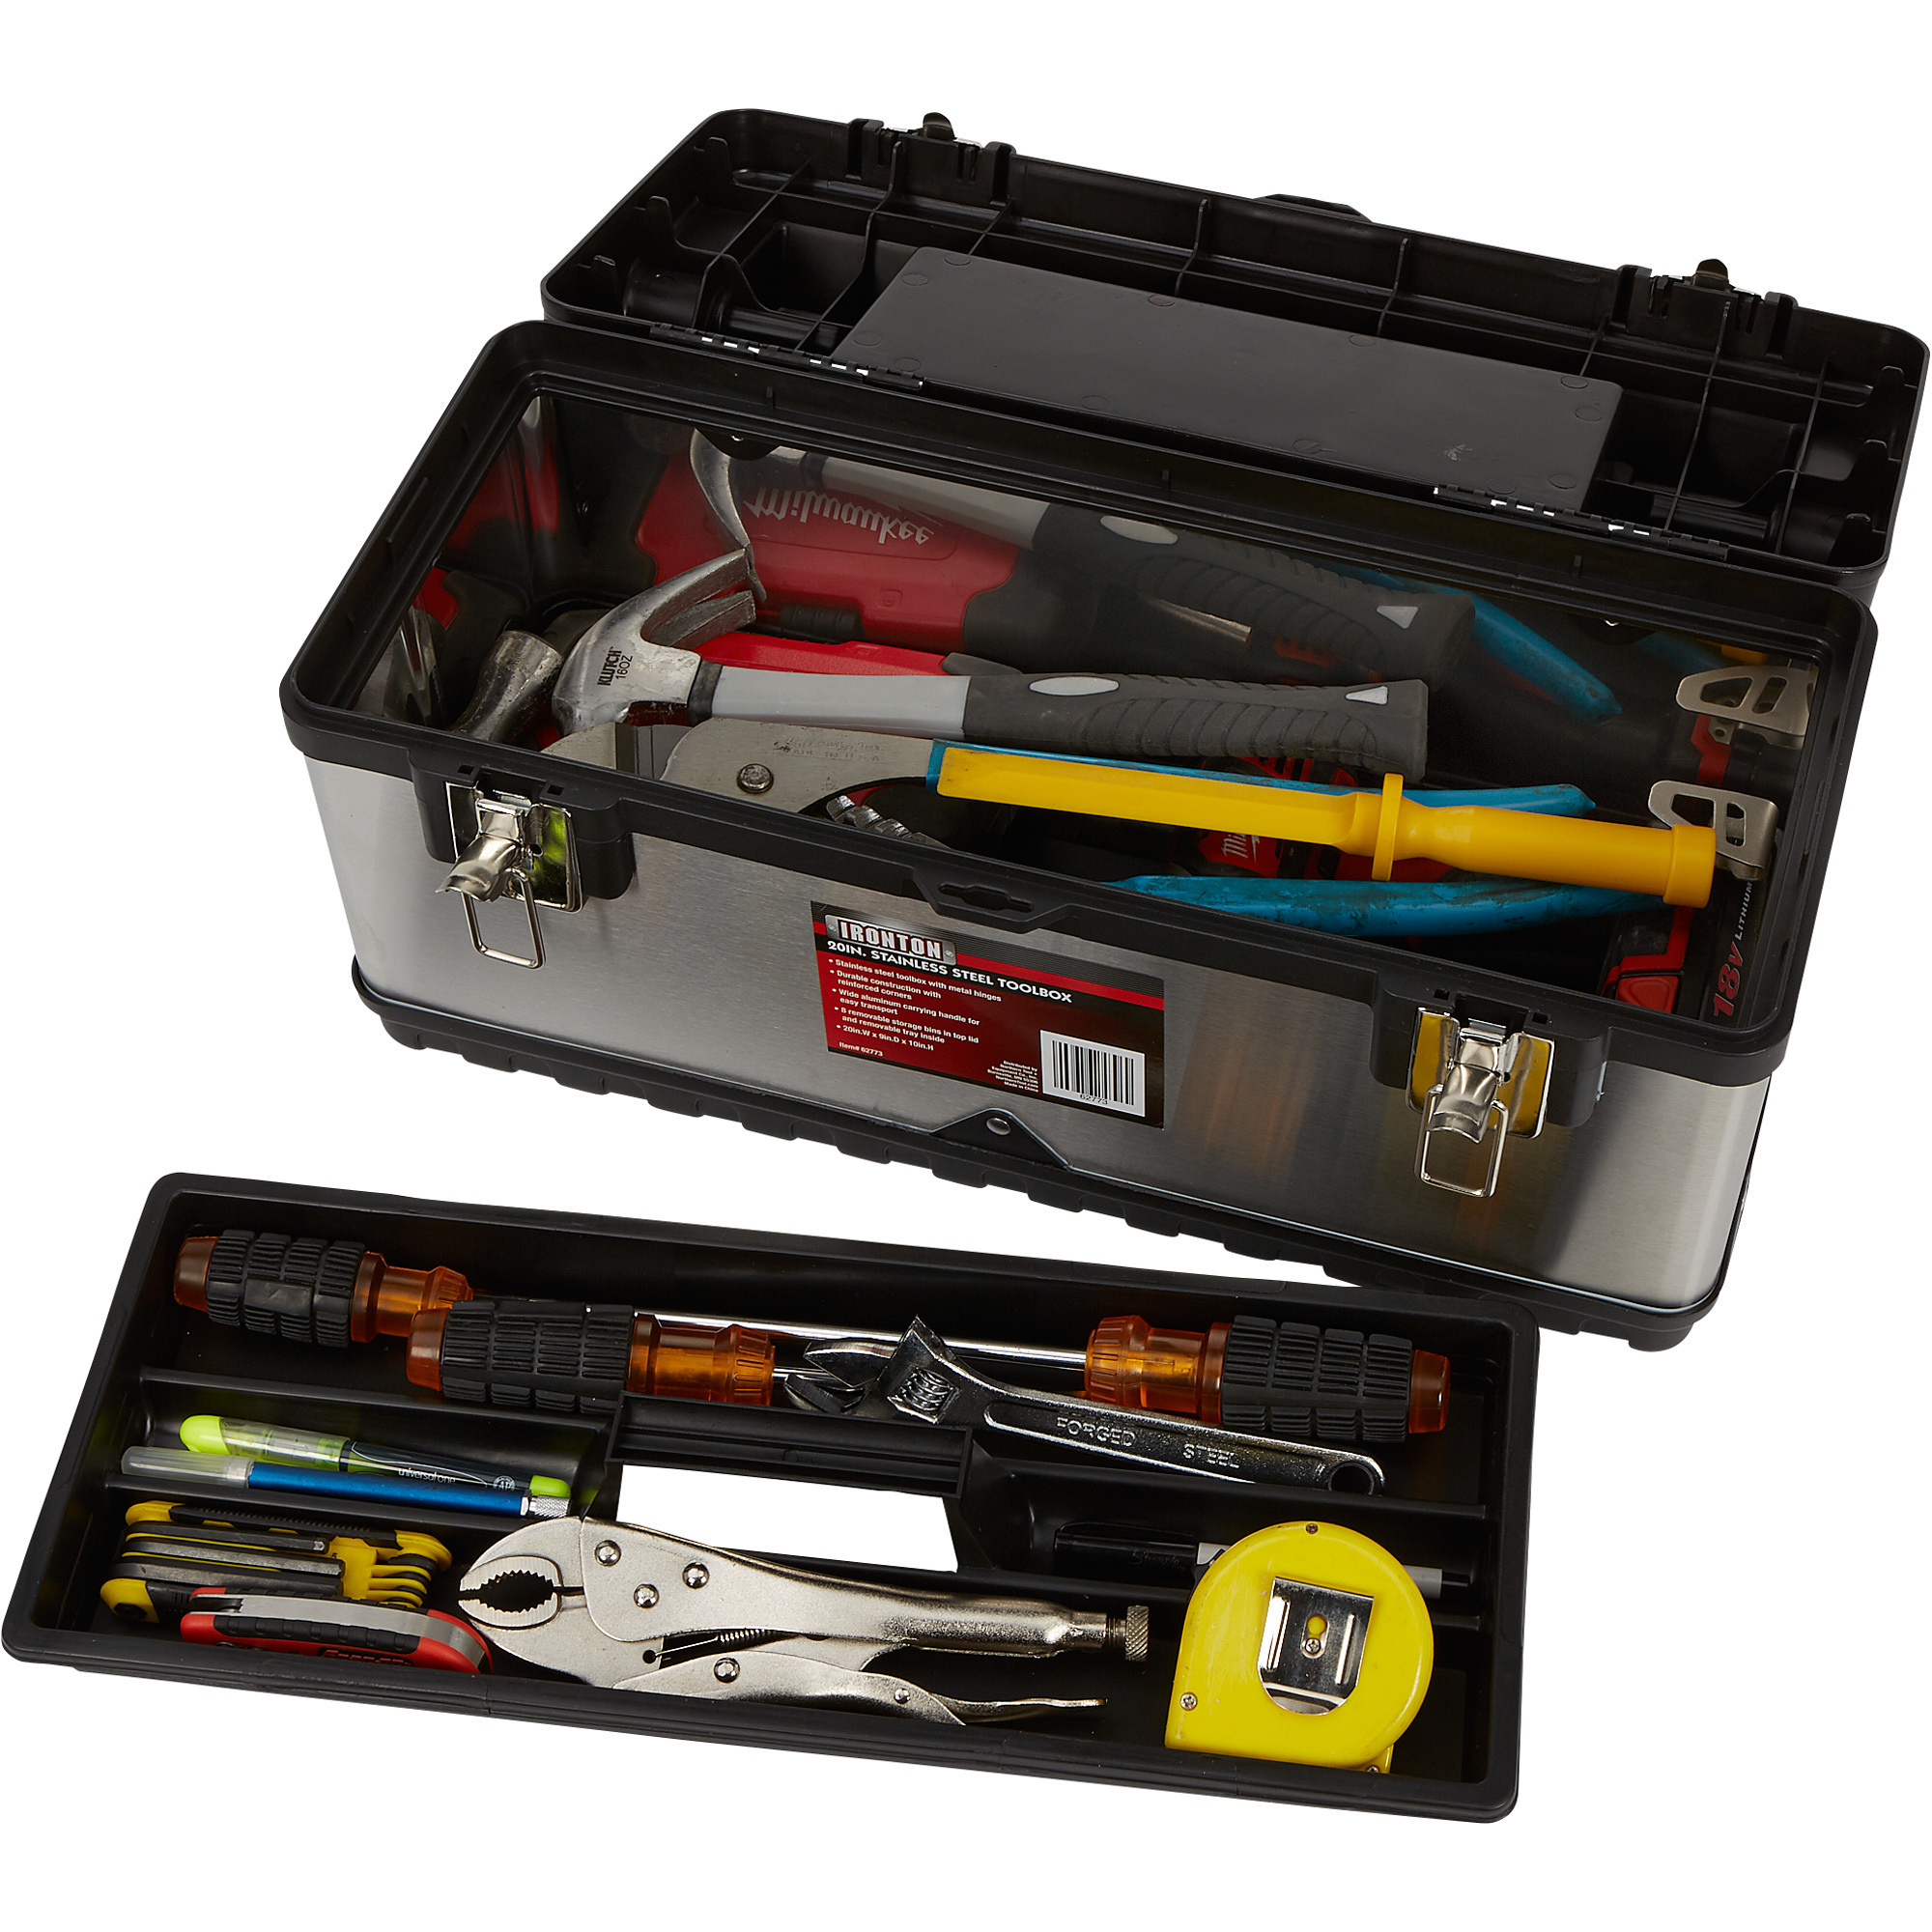 Small Steel Tool Box — Irontite Products Inc.